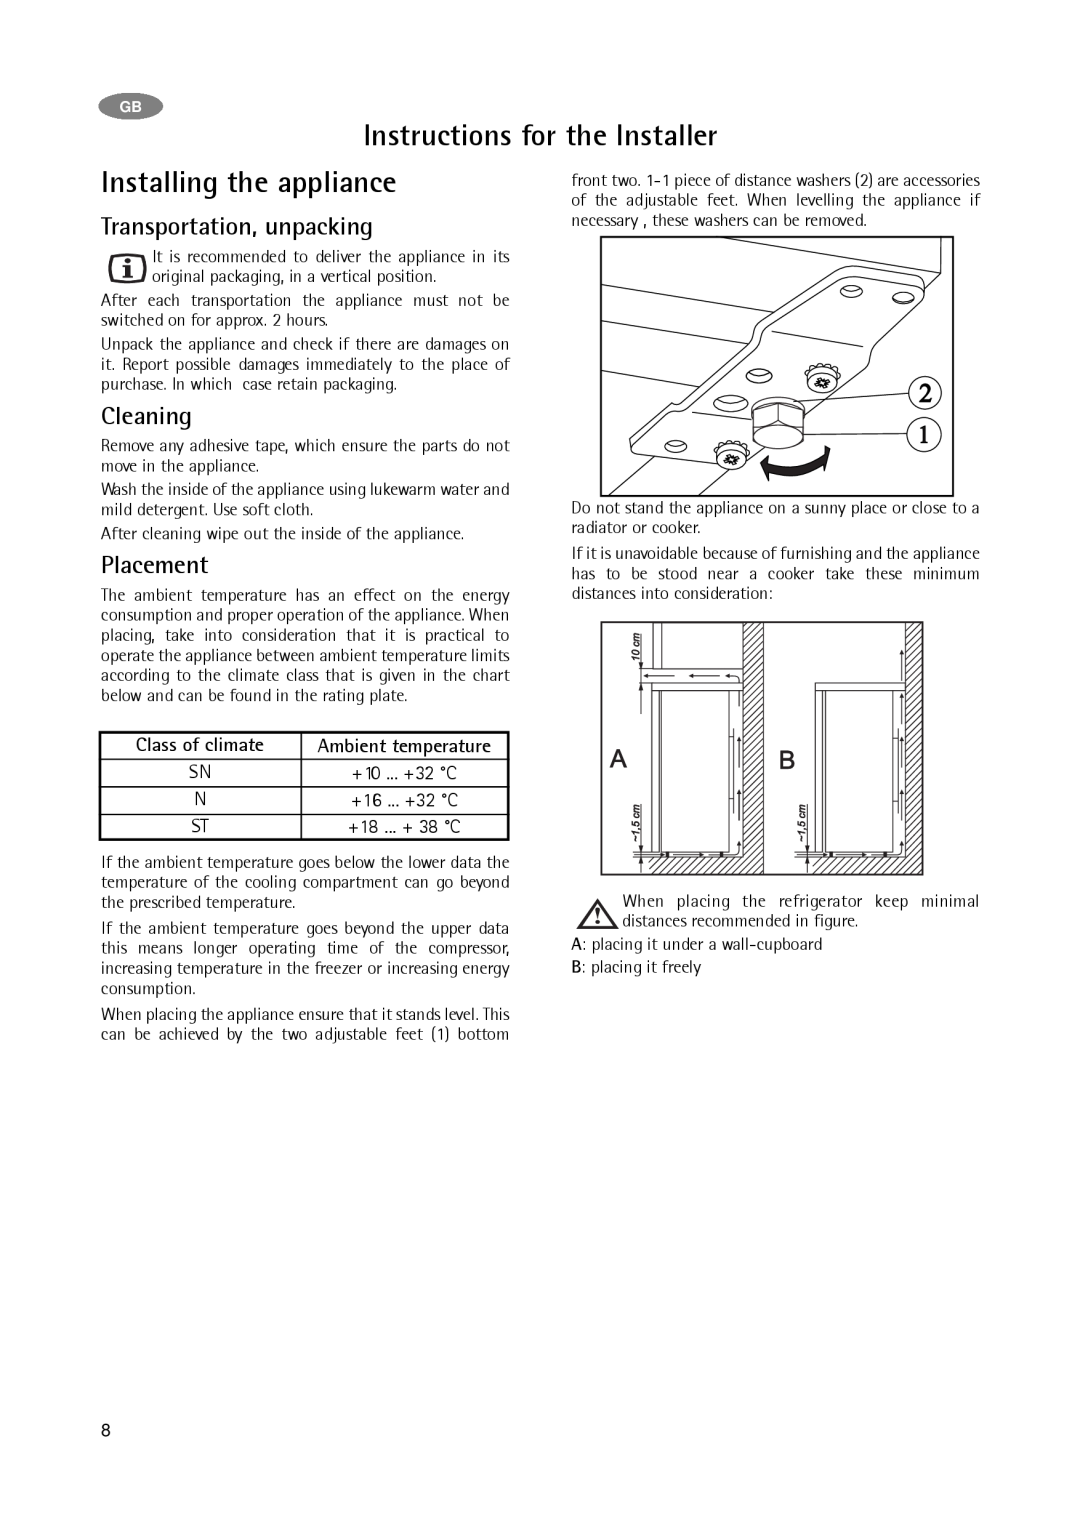 AEG A 75100 GA3 Instructions for the Installer, Installing the appliance, Transportation, unpacking, Cleaning, Placement 